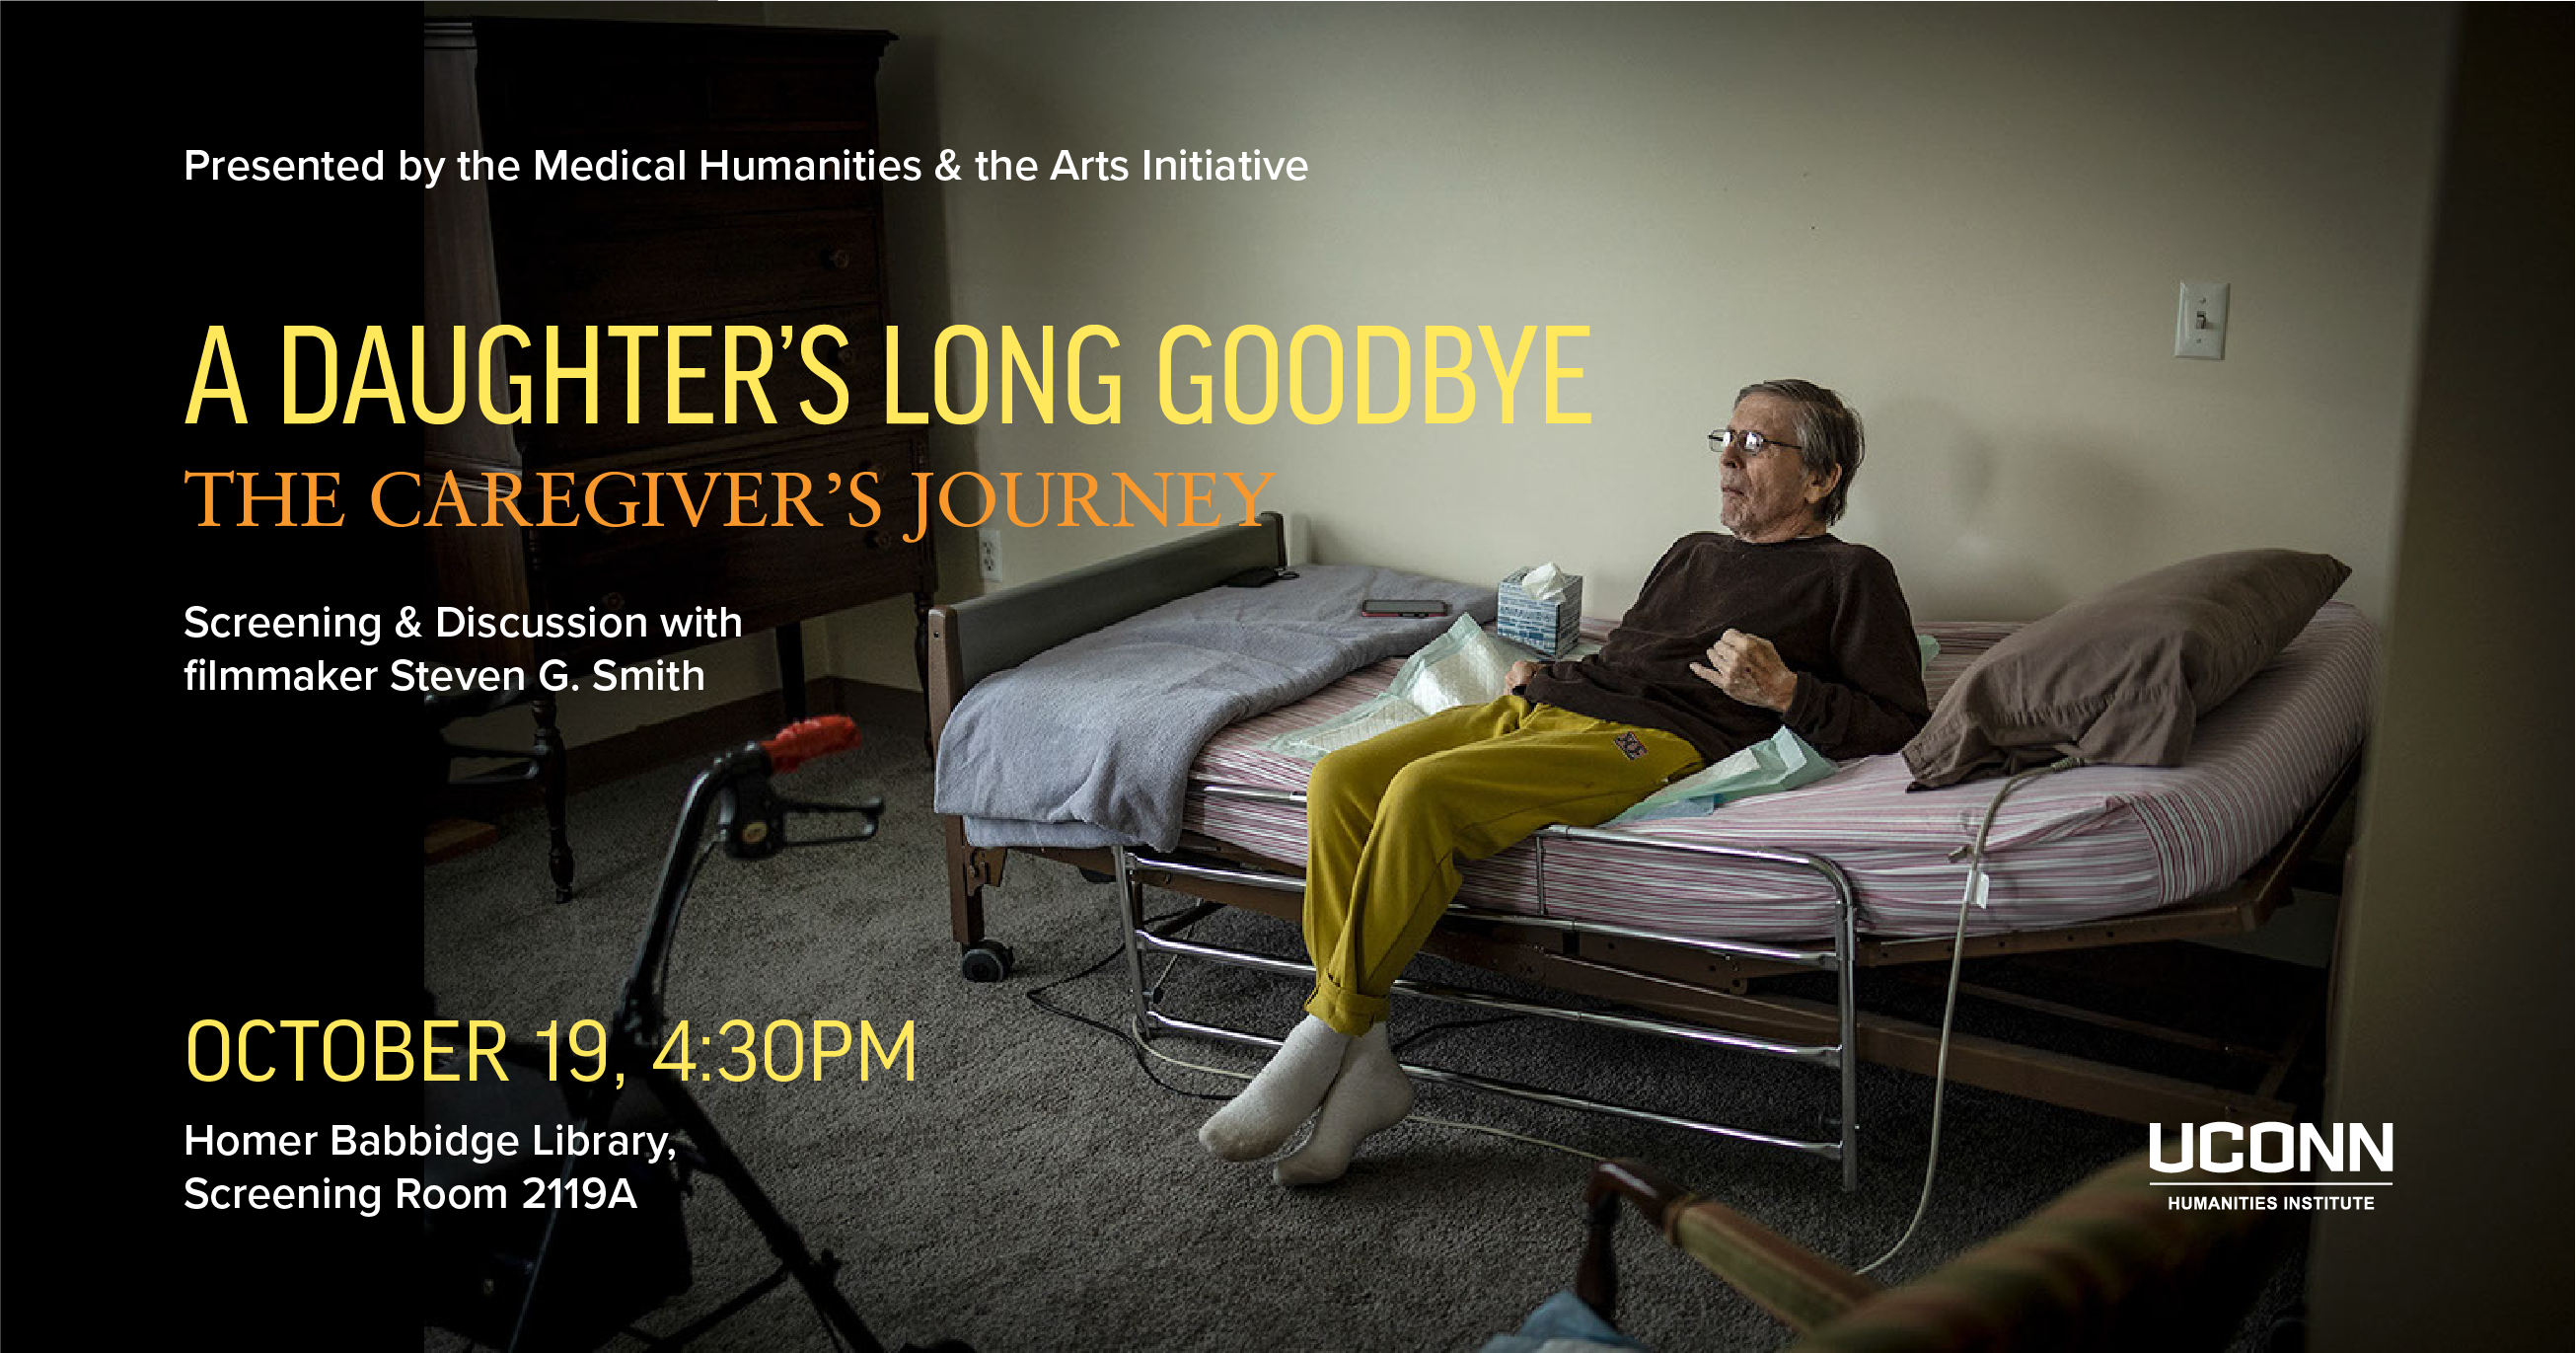 The Medical Humanities & Arts Initiative Presents, A Daughter's Long Goodbye: The Caregivers Journey, screening and discussion with filmmakers Steven G. Smith. October 18, 4:30pm, Homer Babbidge Library, Screening Room 2119A.